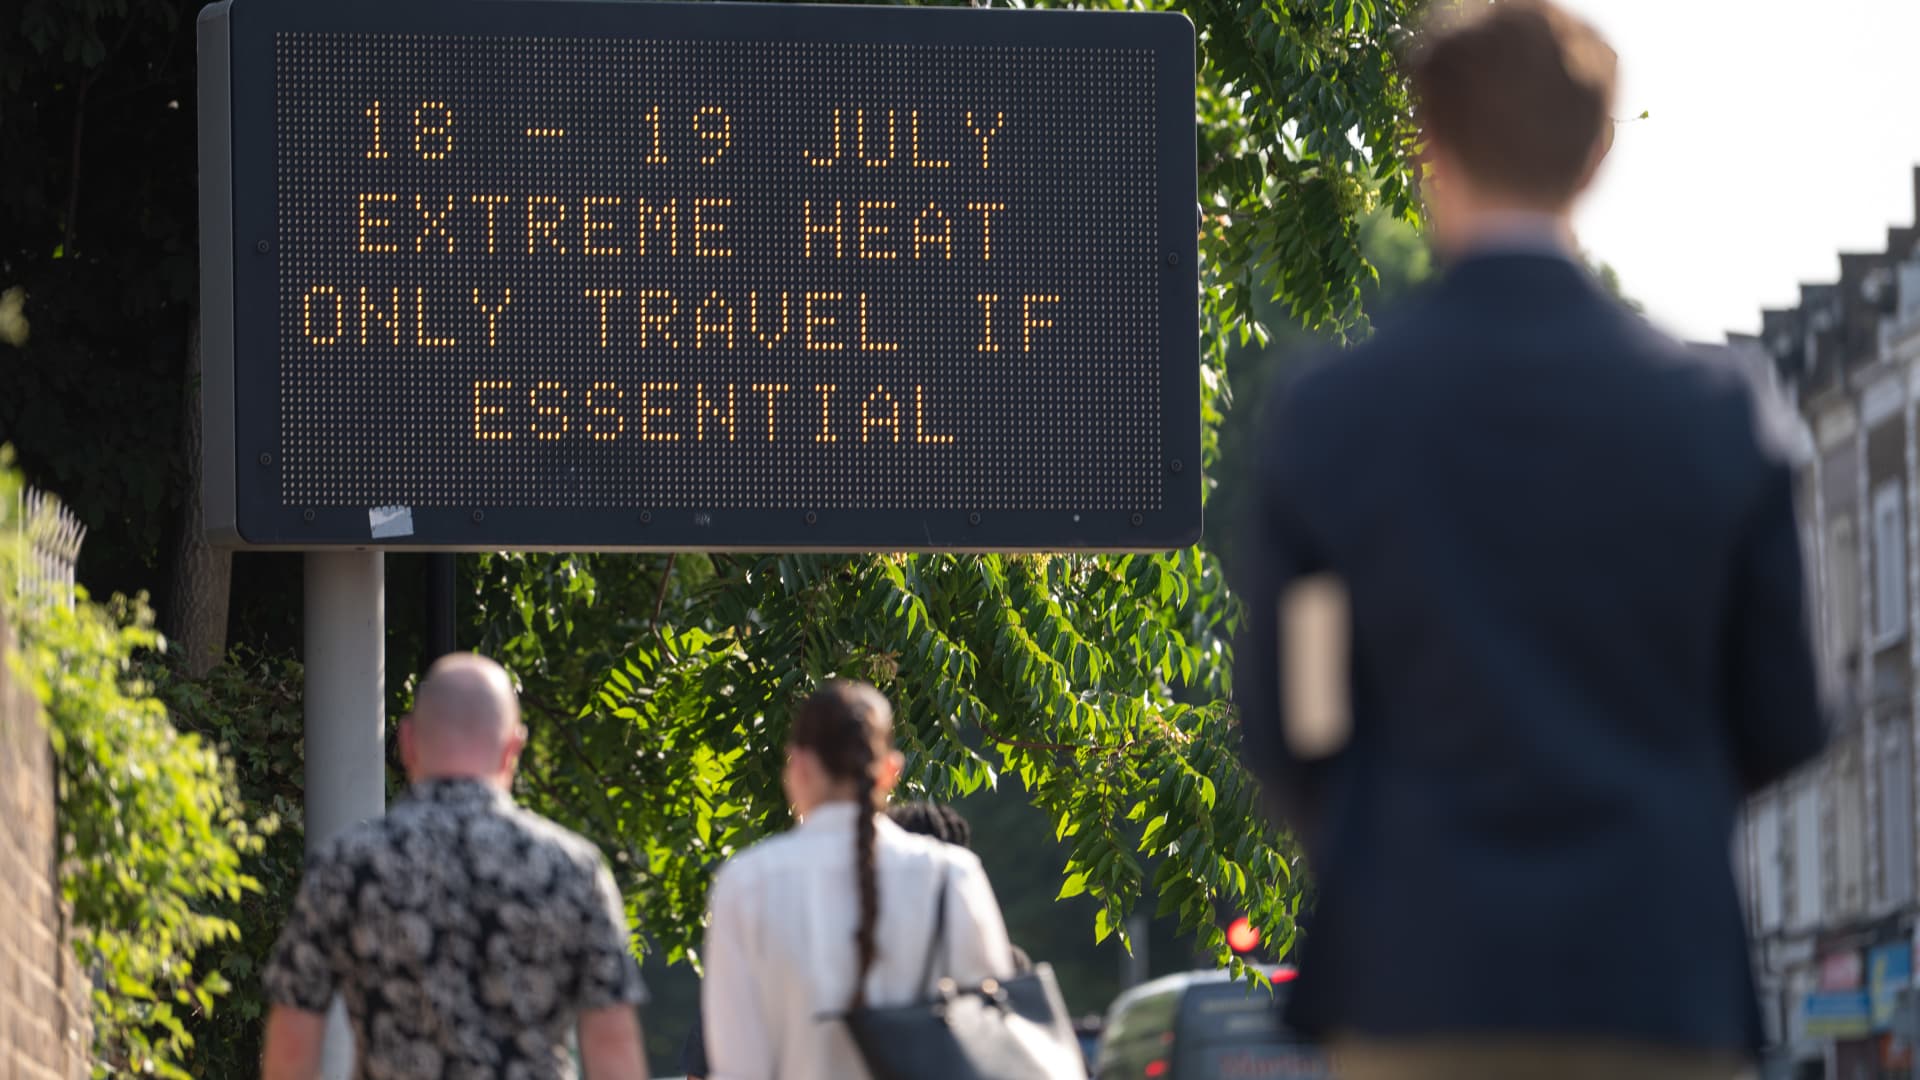 UK logs hottest day on record with temperatures hitting 102.4 Fahrenheit